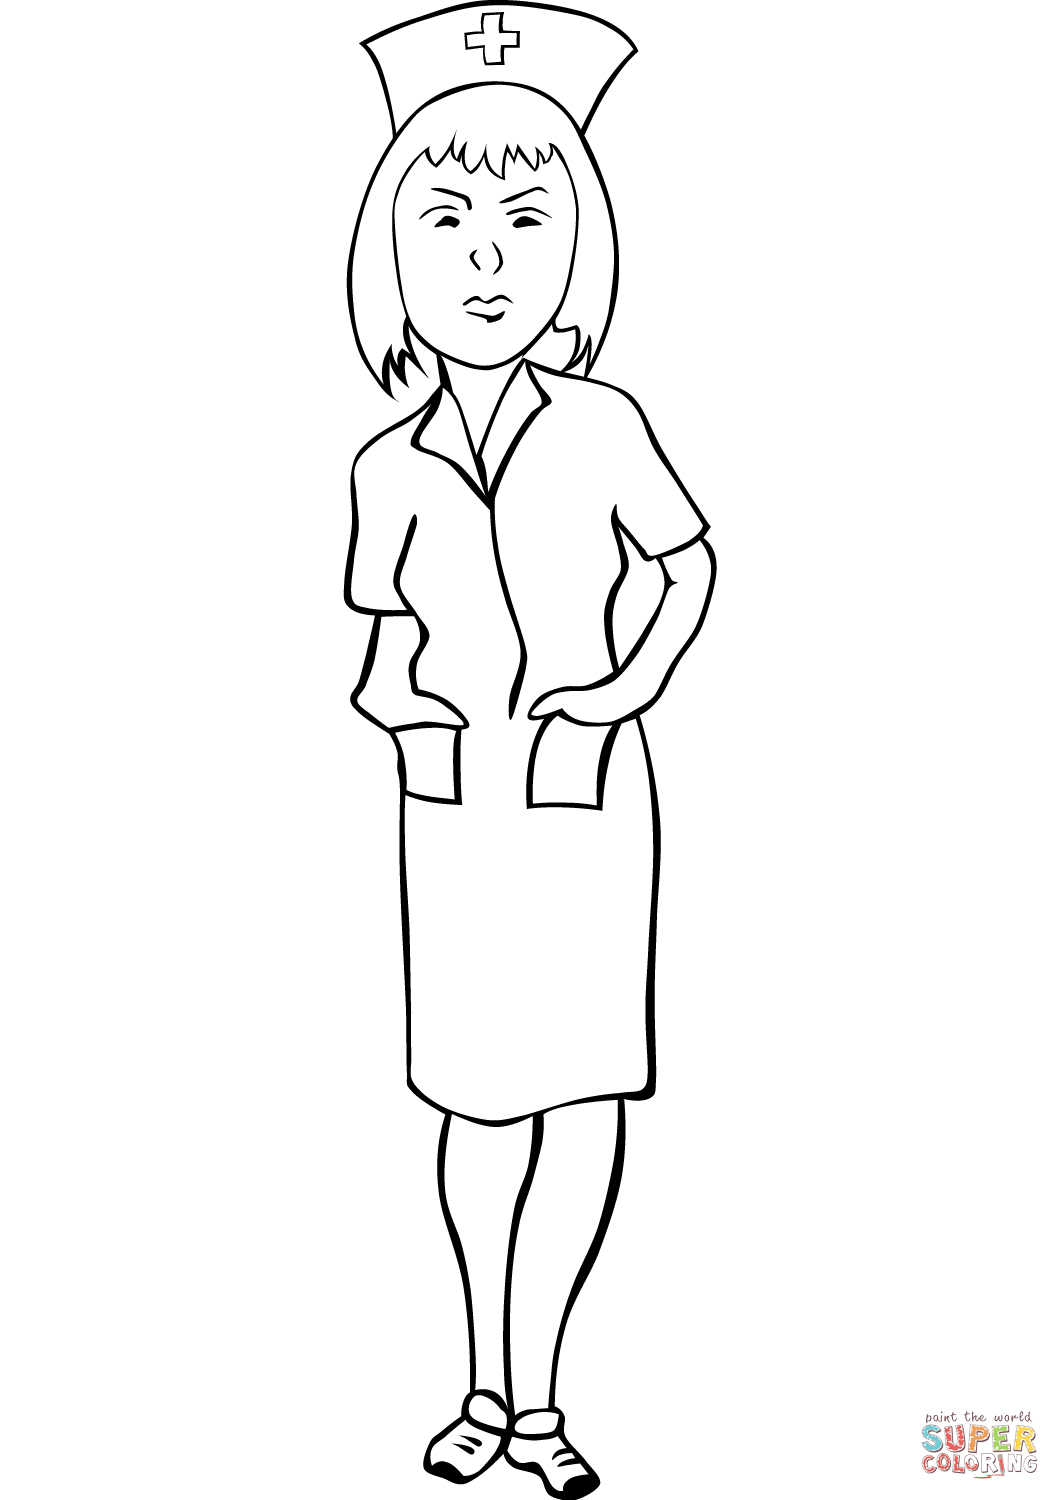 Nurse coloring page free printable coloring pages